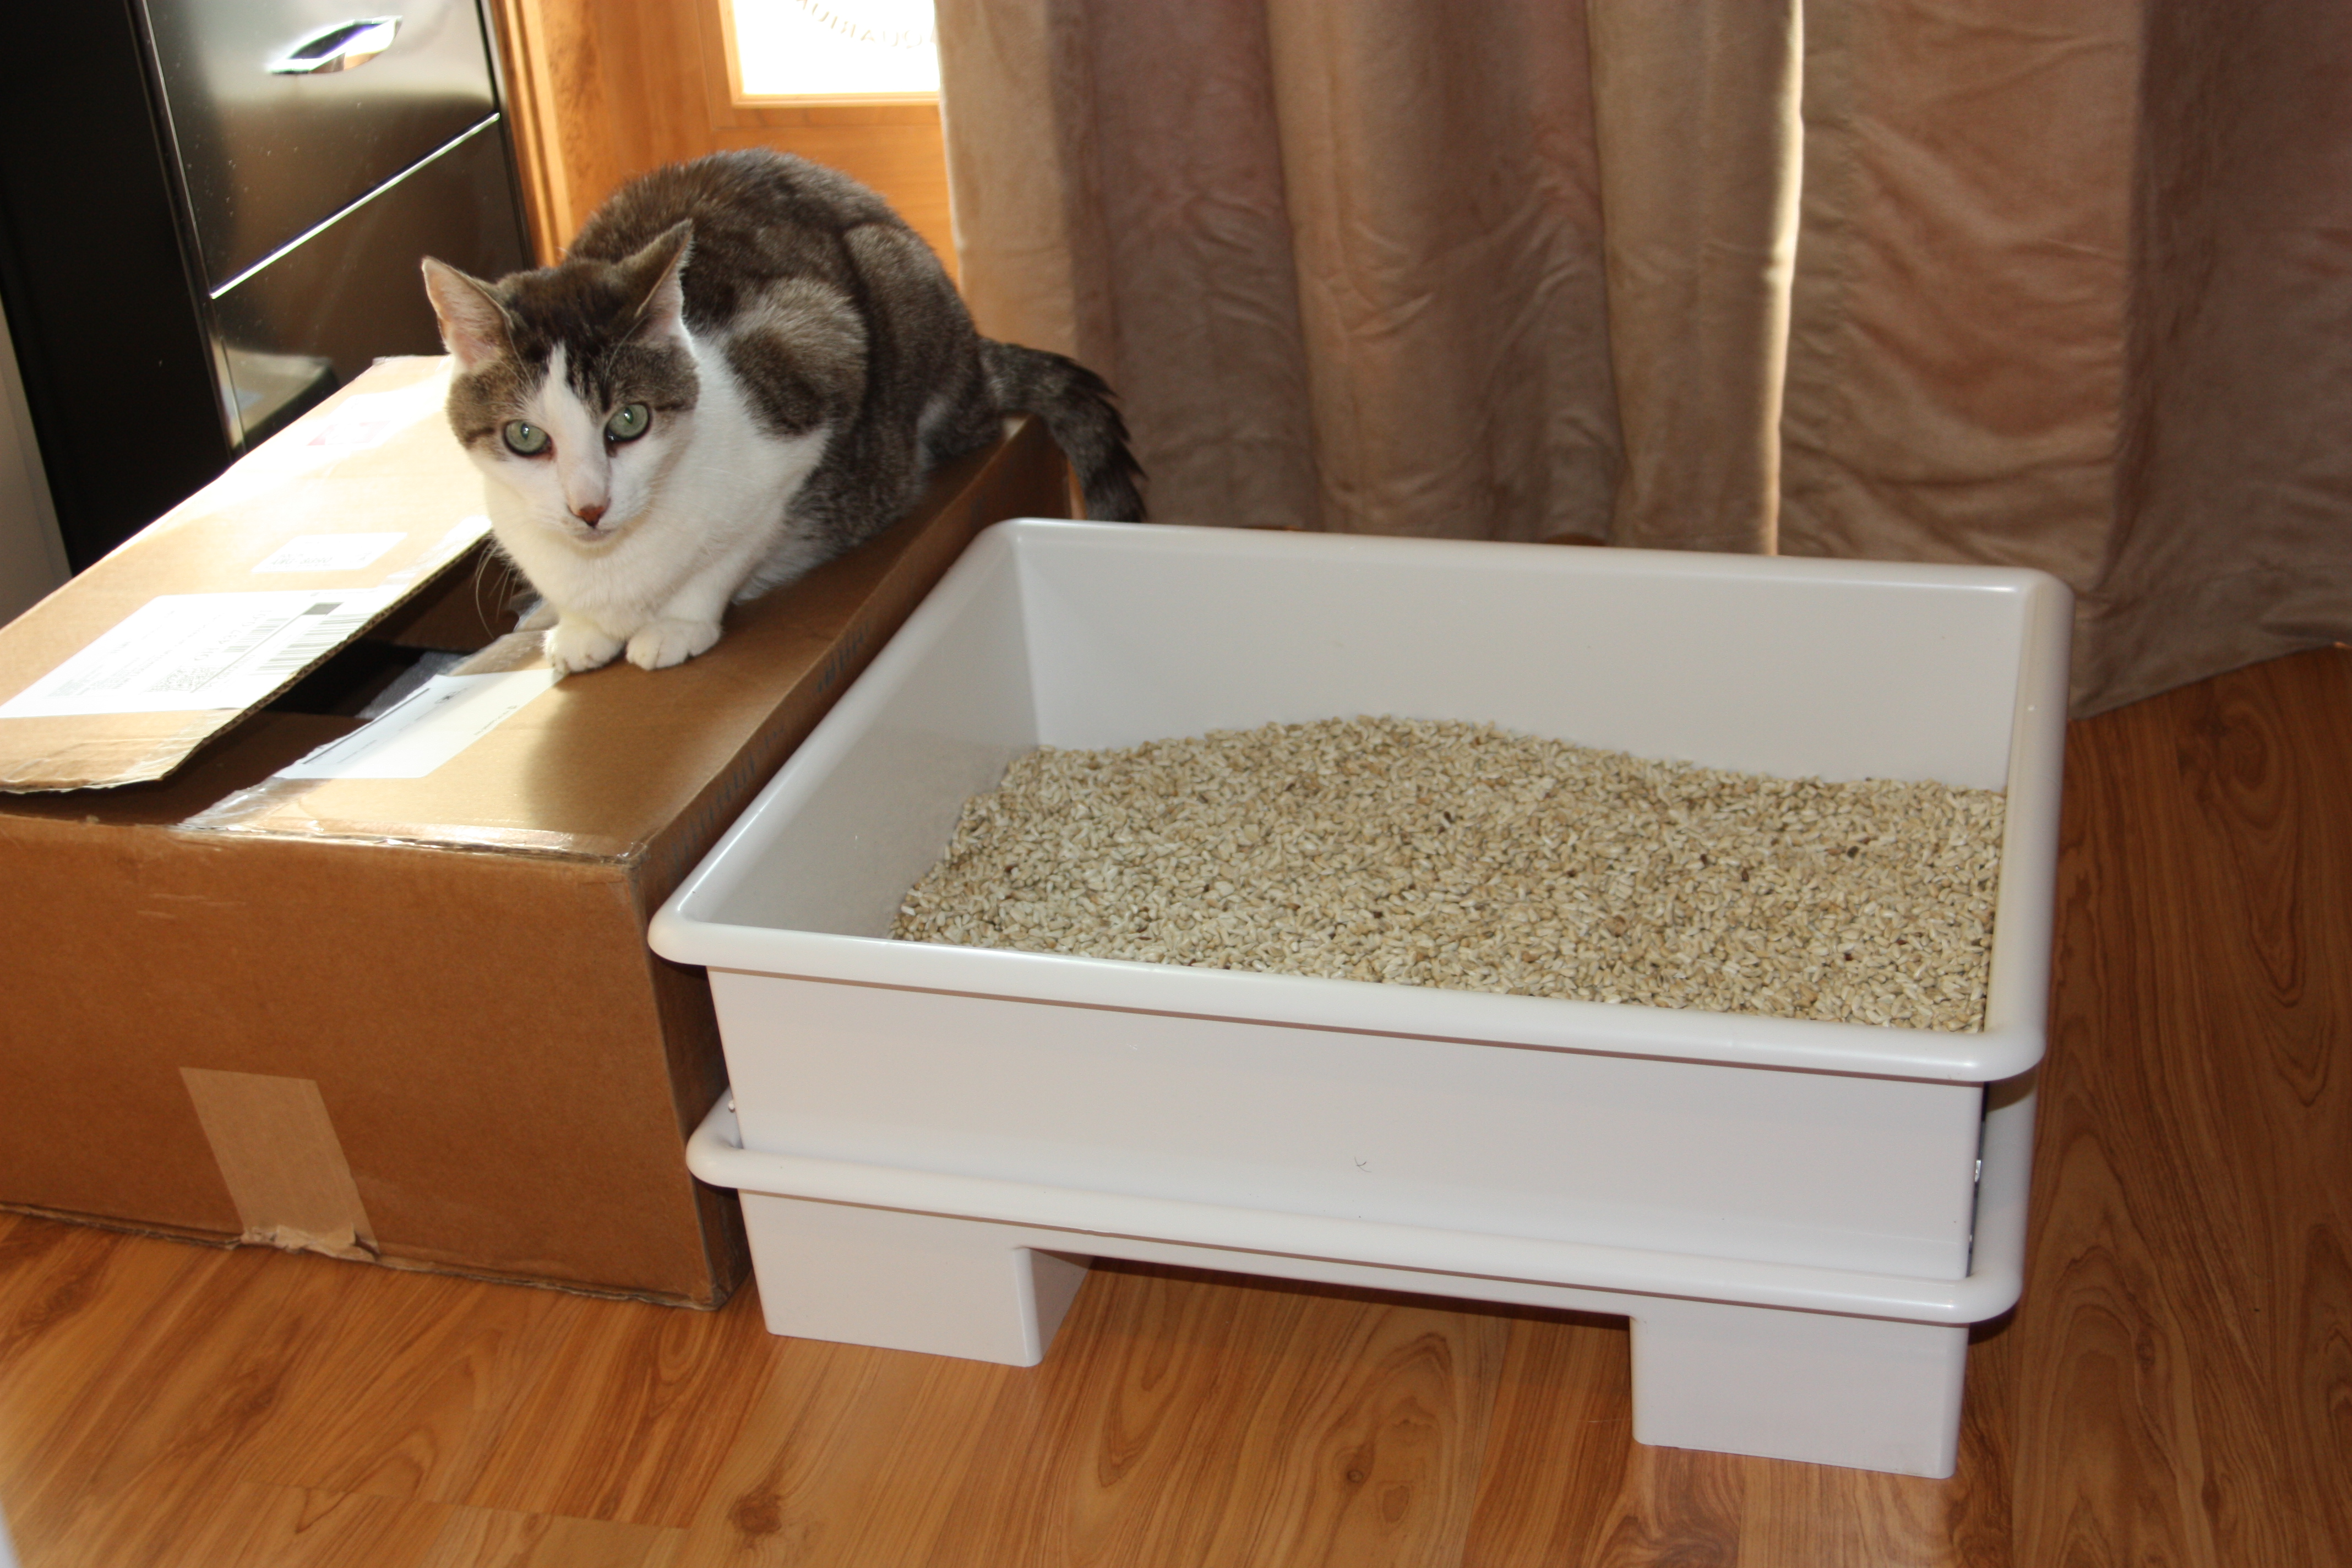 The Smart Cat Box. Saves Money Too! The Tiniest Tiger's